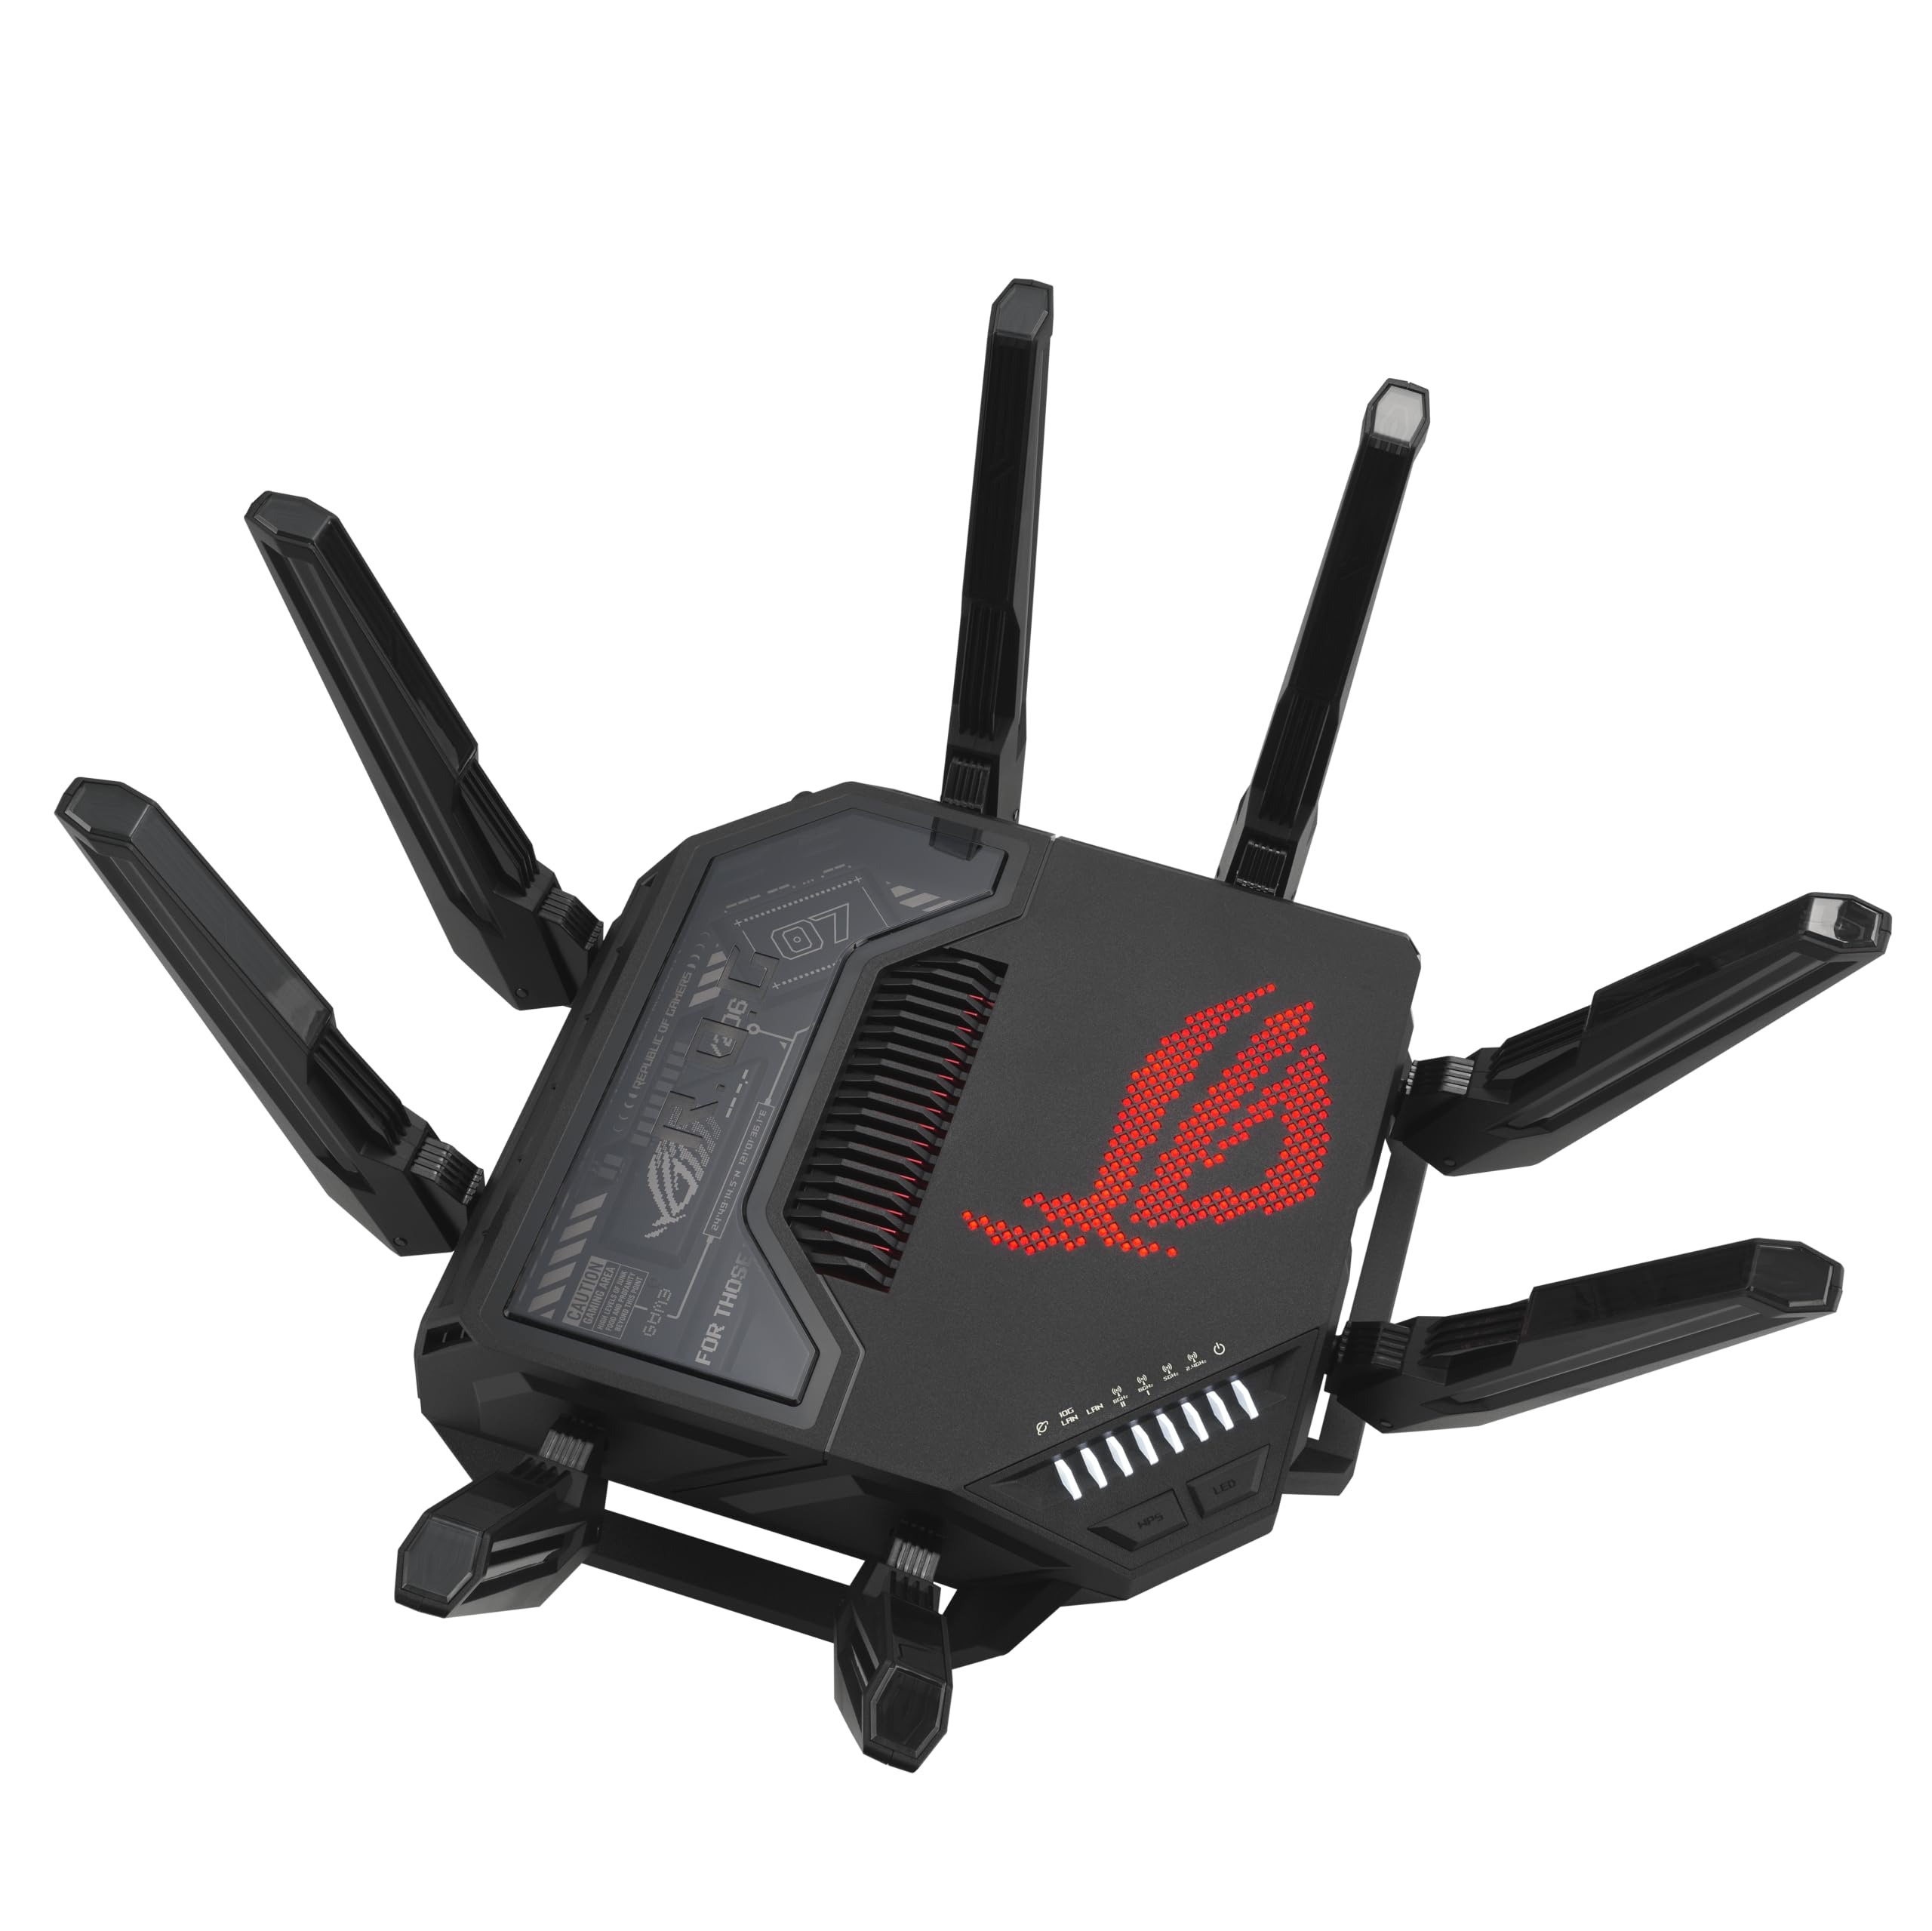 ASUS ROG Rapture GT-BE98 PRO First Quad-Band WiFi 7 Gaming Router supports 320MHz, Dual 10G Port, Triple-level Game Acceleration, Mobile Game Mode, Subscription-Free Security, AiMesh, and VPN features